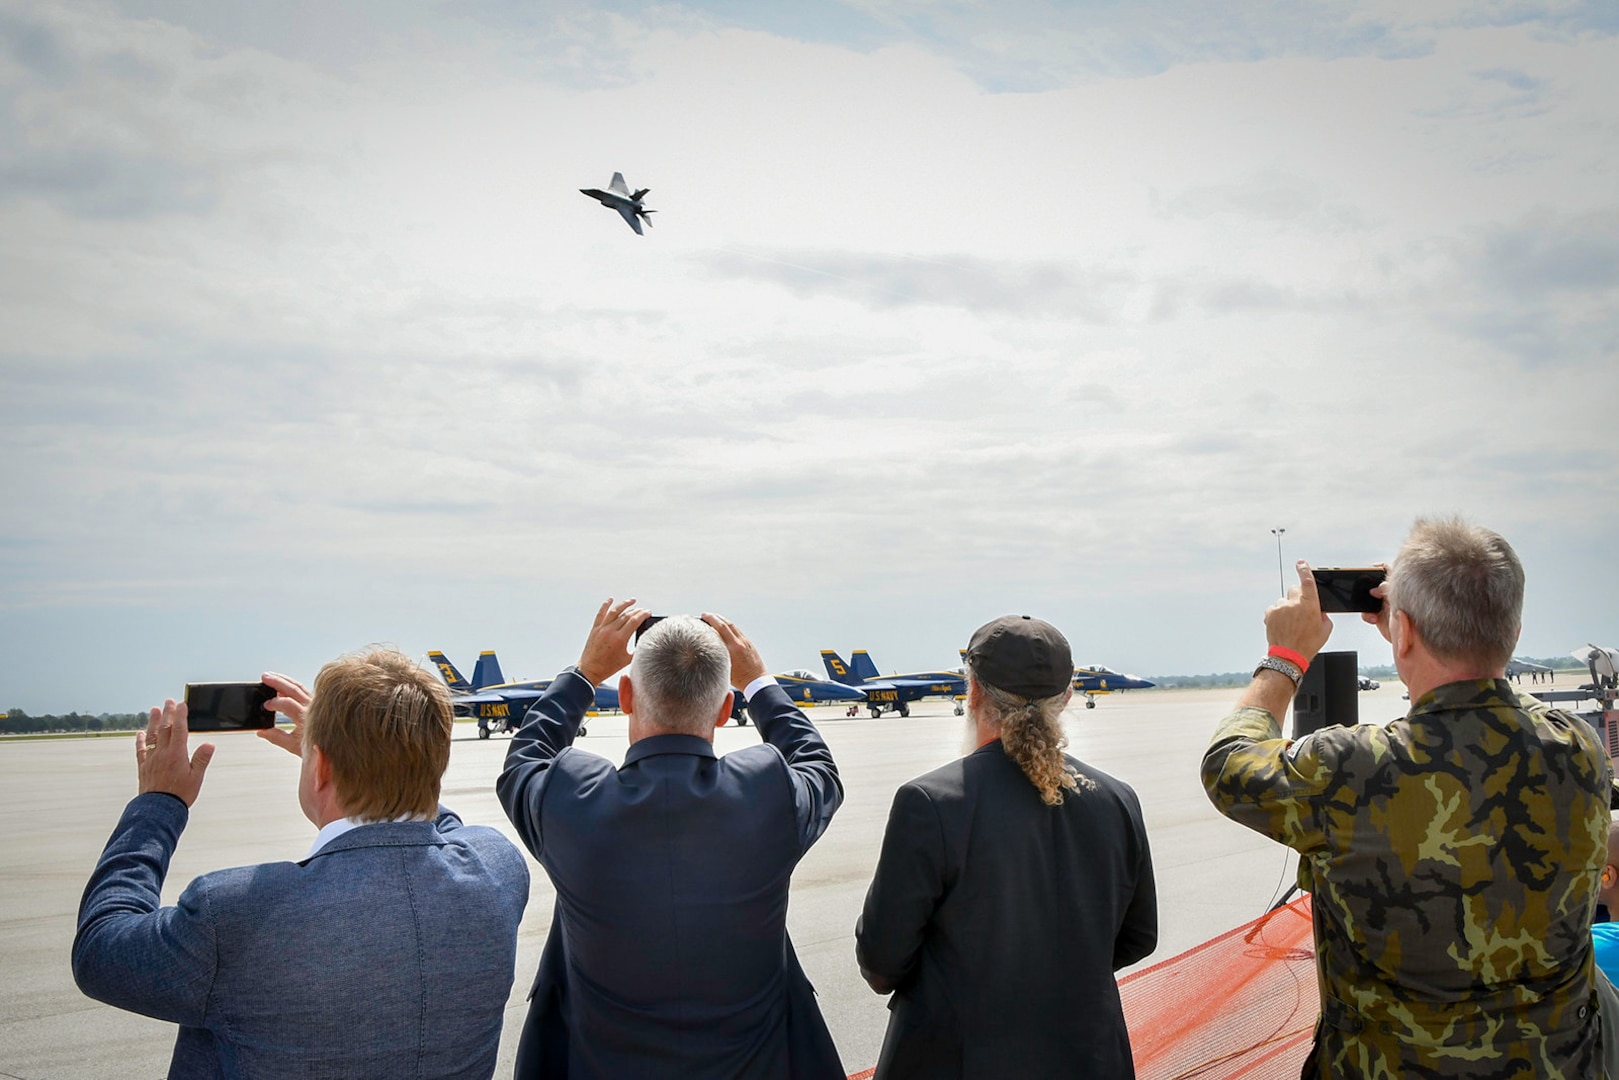 Members of a Czech Delegation including Czech Armed Forces, and Nebraska National Guard leadership came to Nebraska to participate in the airshow this year in celebration of 30 years of partnership with Nebraska and Texas through the Department of Defense’s State Partnership Program Aug. 26, 2023.